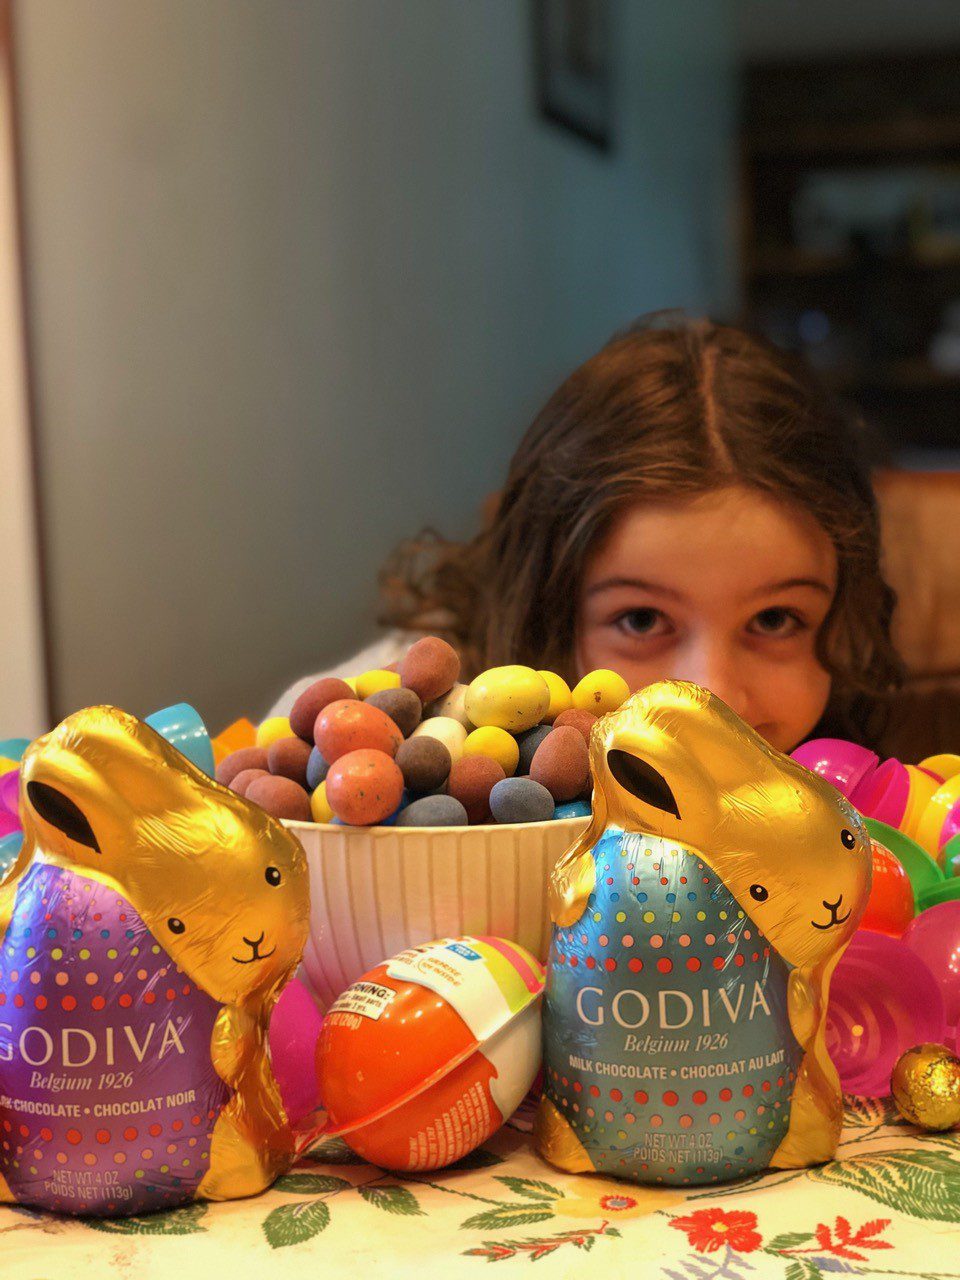 A girl with some chocolate bunnies and fruit